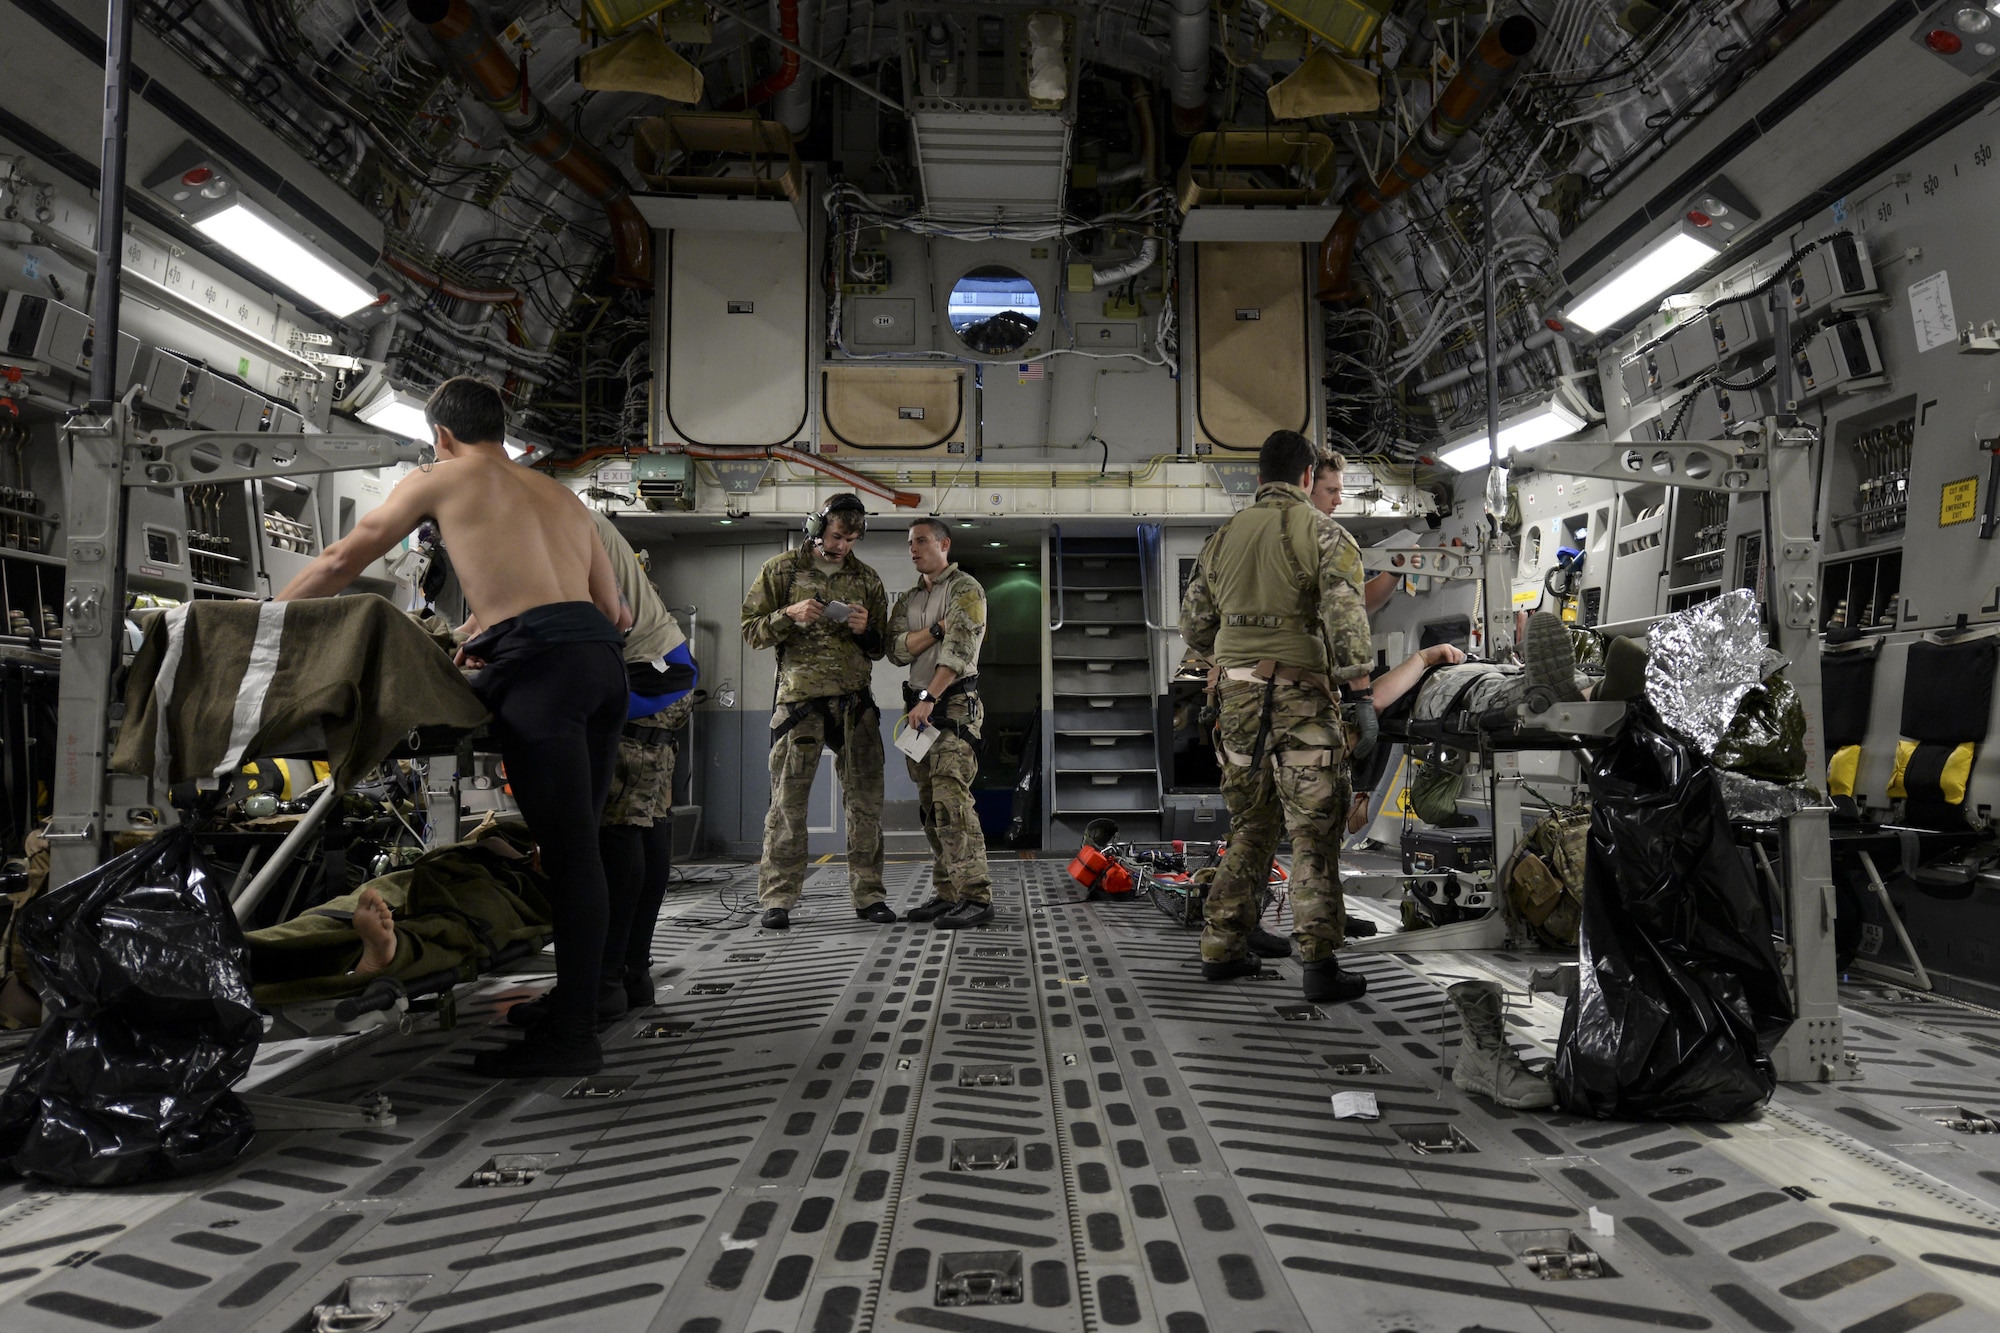 A team of pararescuemen assigned to the 38th Rescue Squadron, Moody Air Force Base, Ga., tend to the simulated injuries of three Airmen May 17, 2017, during Exercise RAPID RESCUE aboard a 3d Airlift Squadron C-17 flying over the coast of Va. When deployed, pararescuemen routinely support aeromedical evacuations aboard cargo aircraft. (U.S. Air Force photo by Senior Airman Aaron J. Jenne)